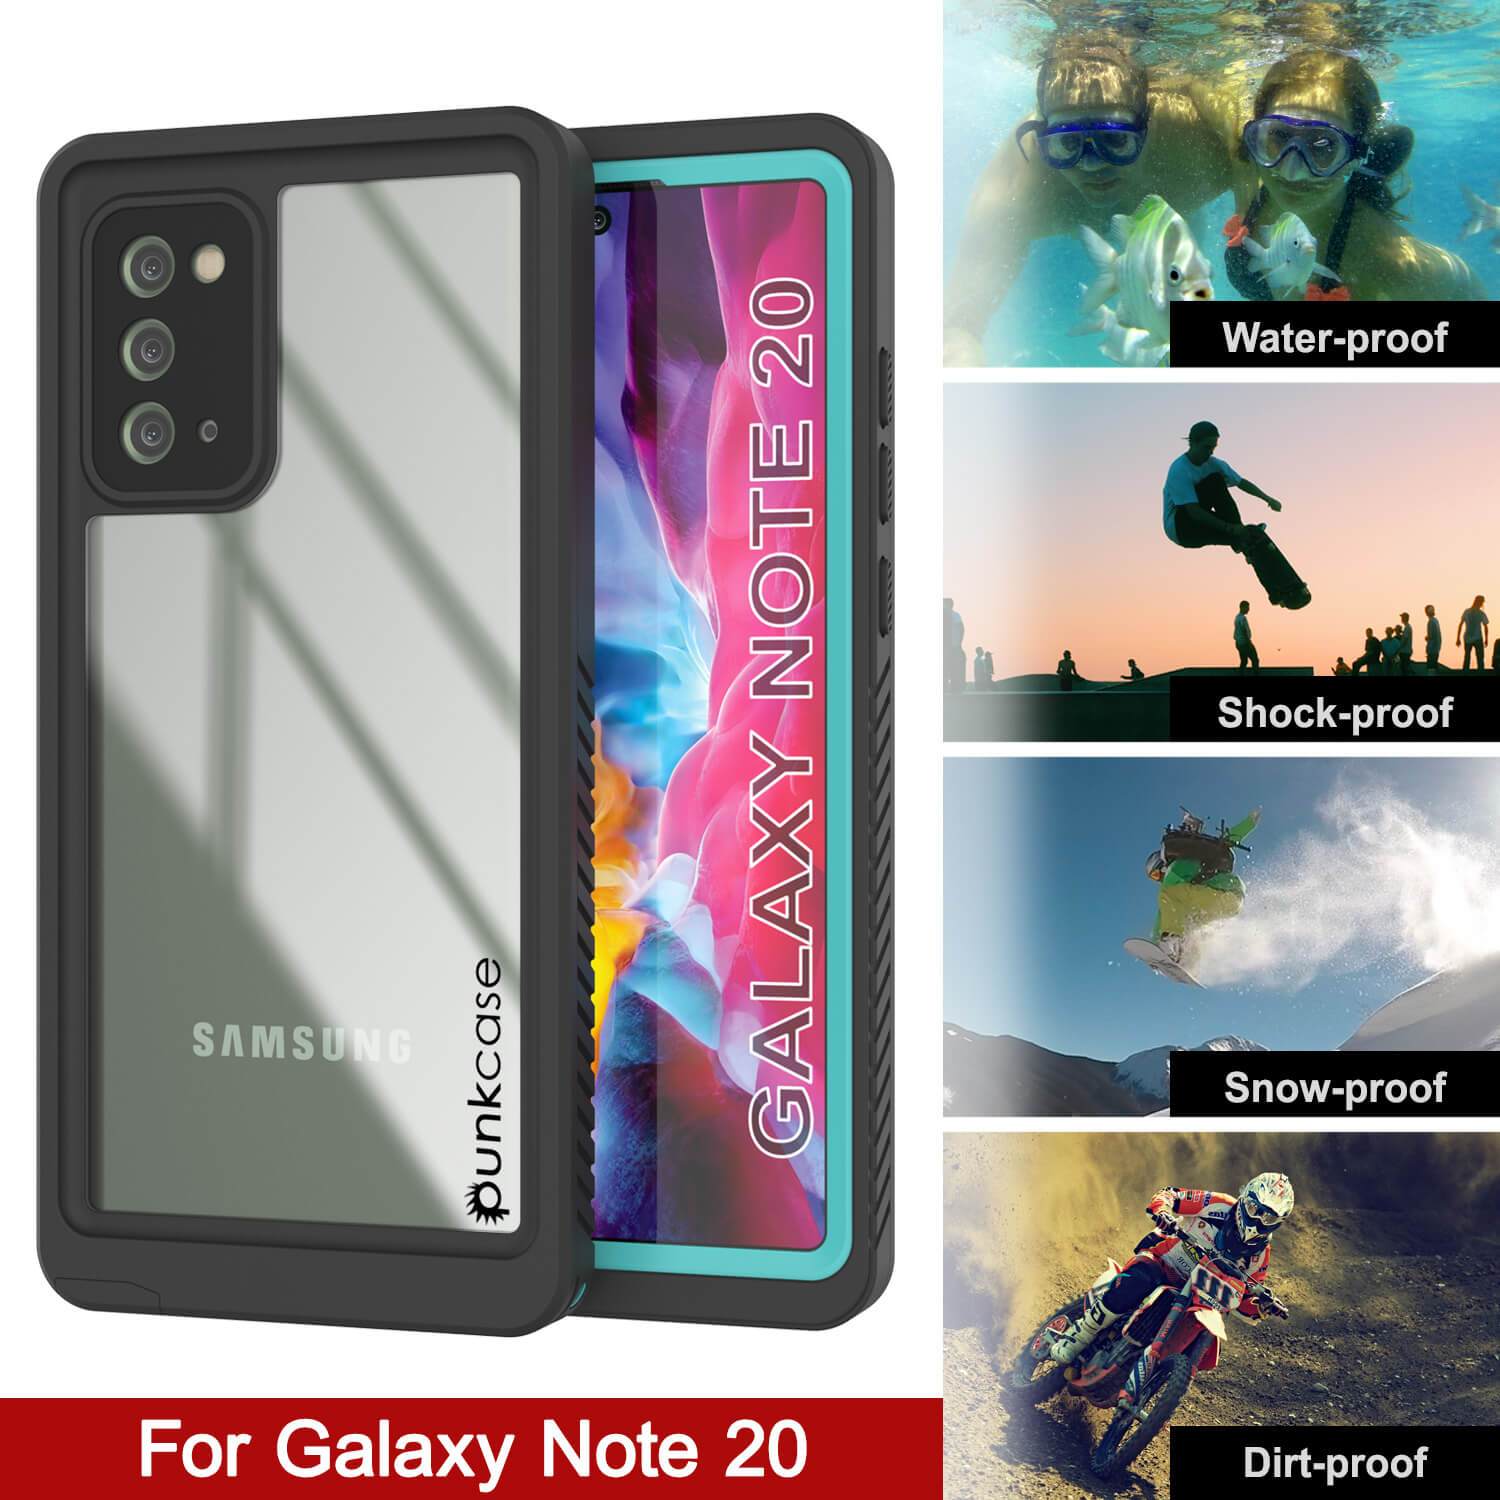 Galaxy Note 20 Case, Punkcase [Extreme Series] Armor Cover W/ Built In Screen Protector [Teal]